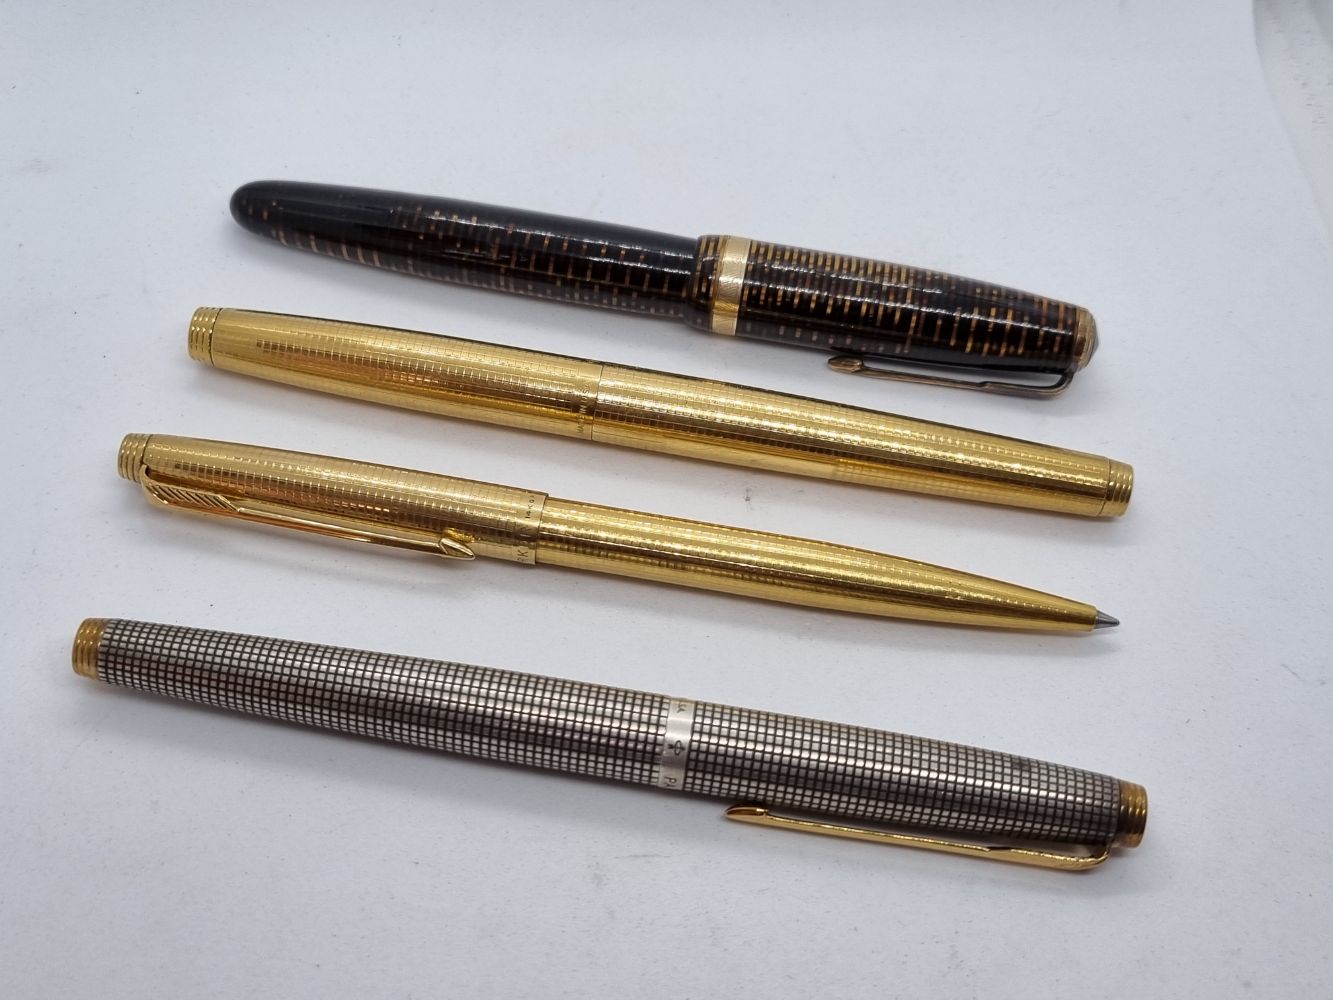 Vintage Fountain Pens, Propelling Pencils and Writing Ephemera - Online Only Timed Auction - No handling fee on postage for this sale!